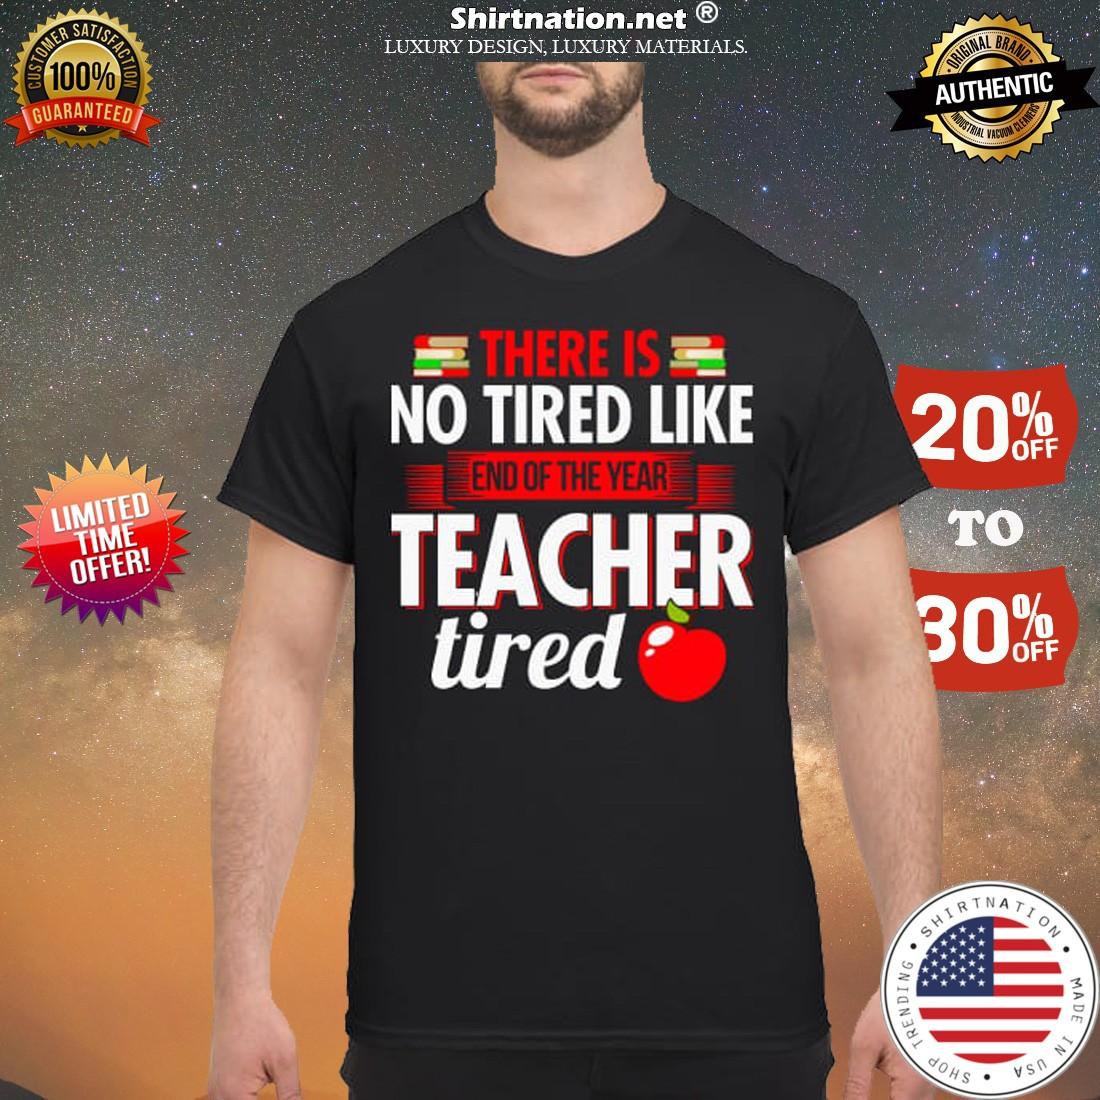 There is no tired like end of year teacher tired shirt